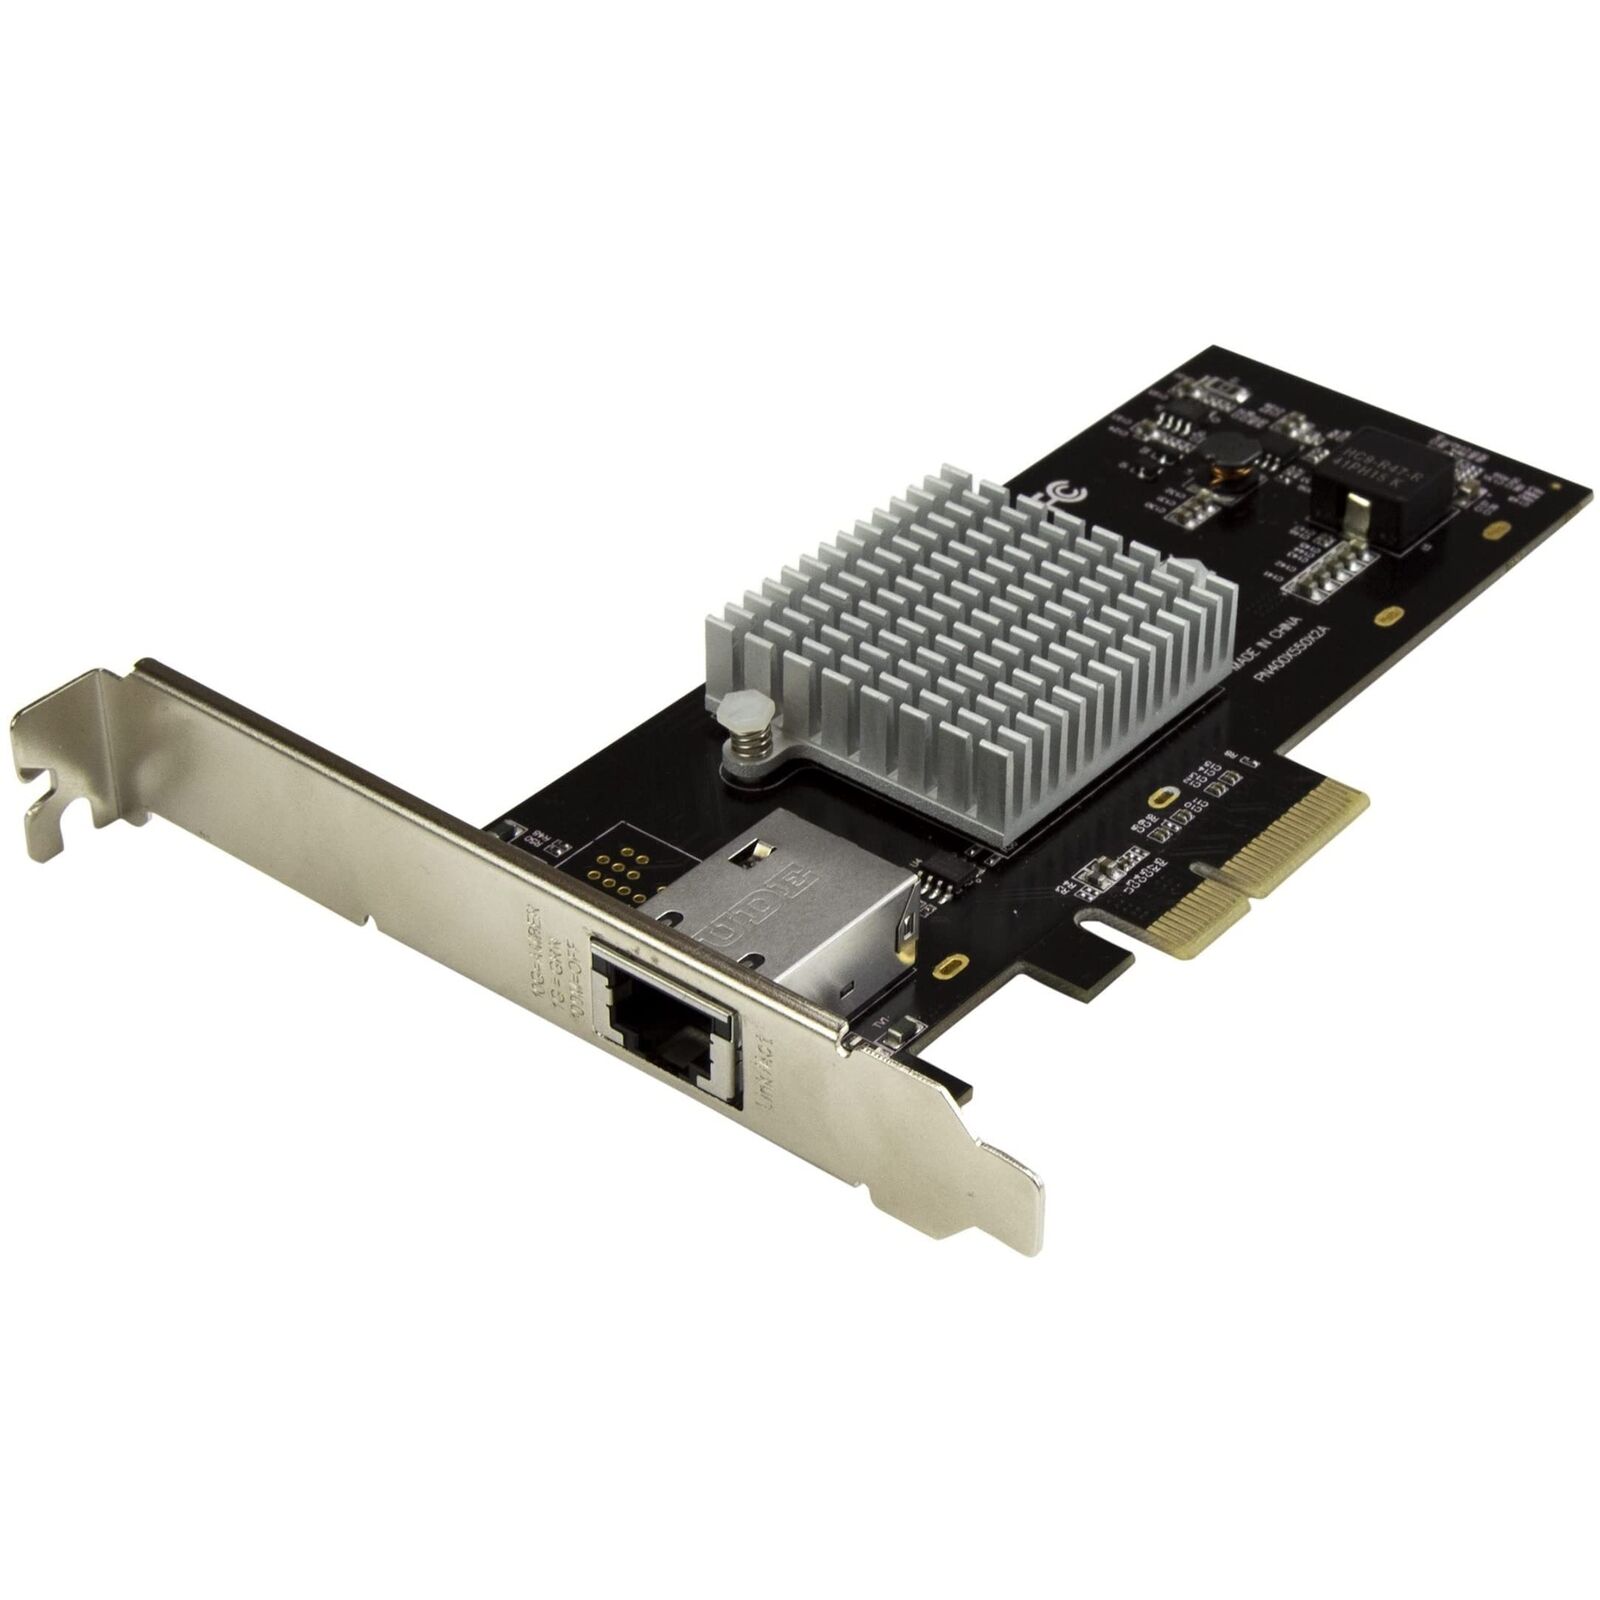 StarTech.com 1 Port 10G PCIe Network Card - 10GBase-T / NBASE-T - RJ45 Port - In